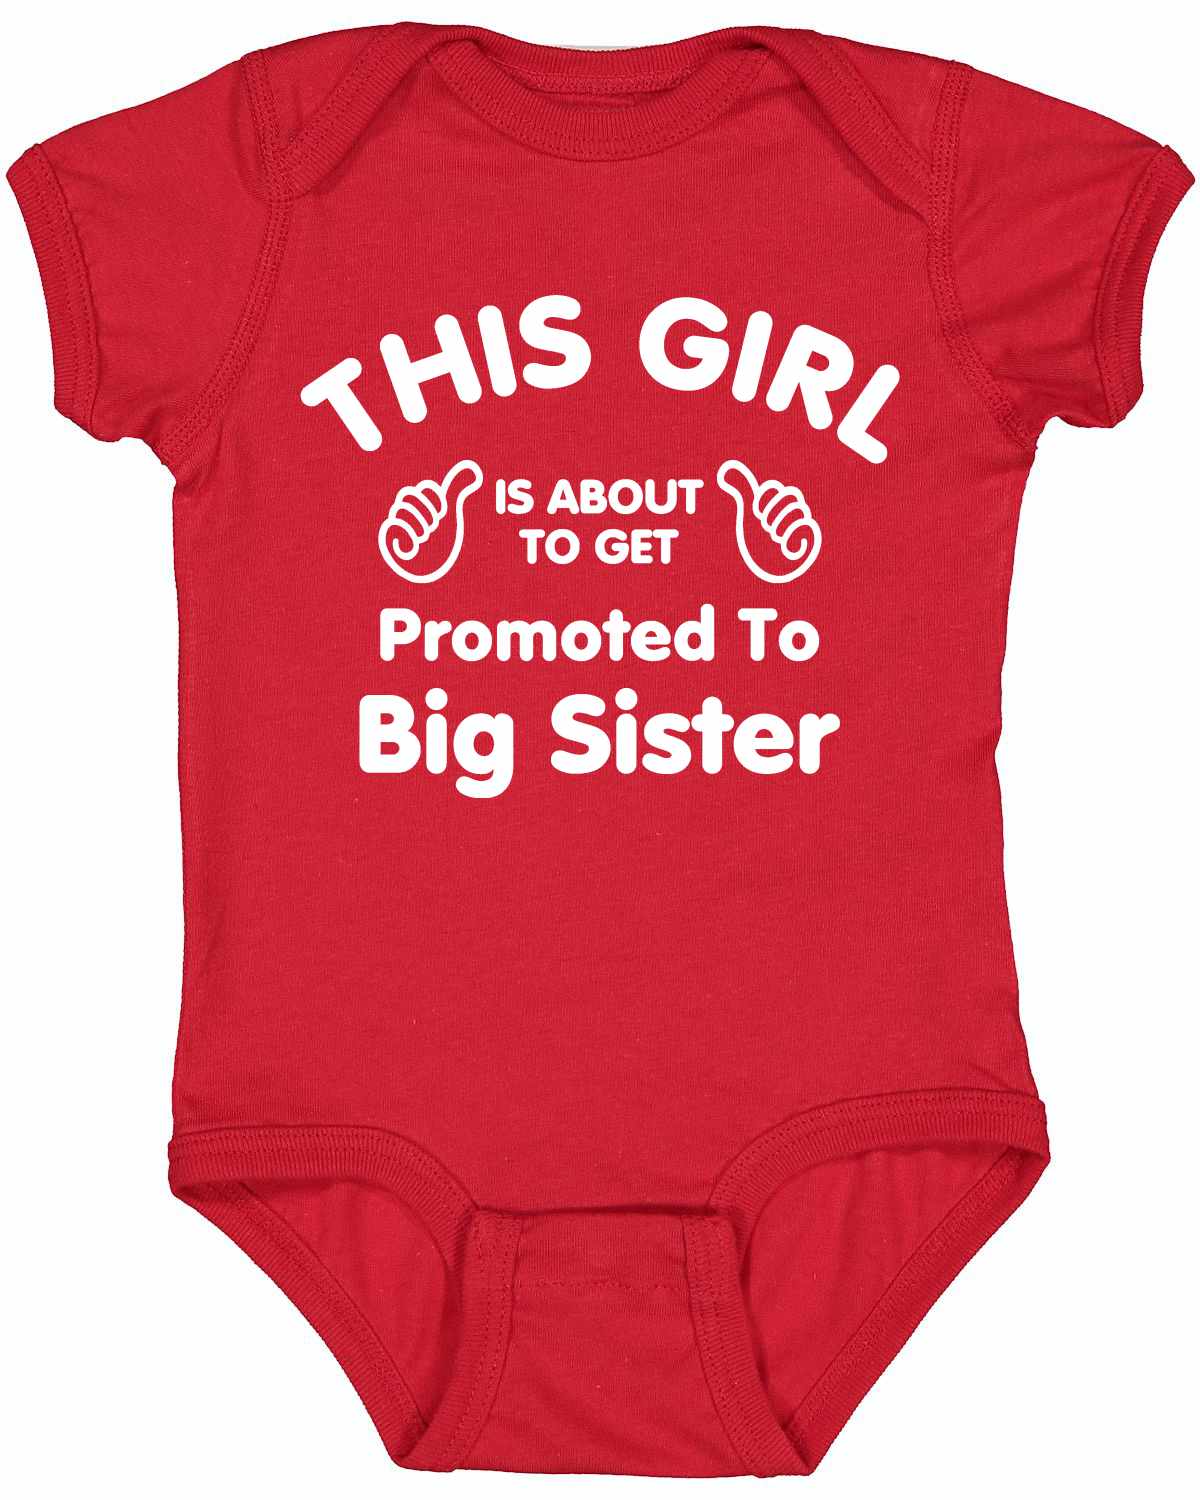 This Girl is About To Get Promoted To Big Sister Infant BodySuit (#1082-10)